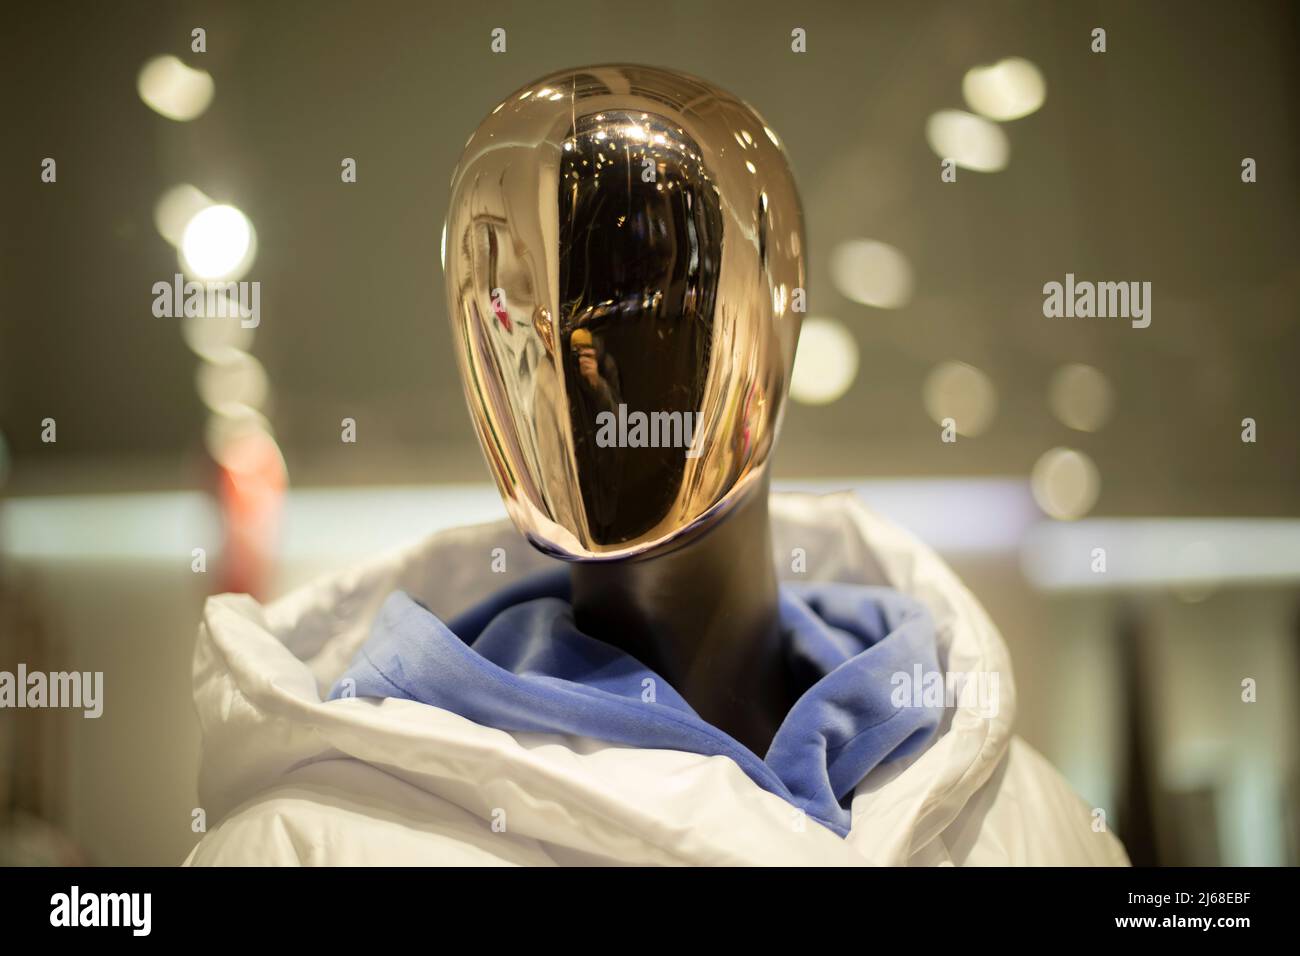 Golden mask on face of mannequin. Details of style and fashion. Mannequin in clothing store. Female figure. Stock Photo